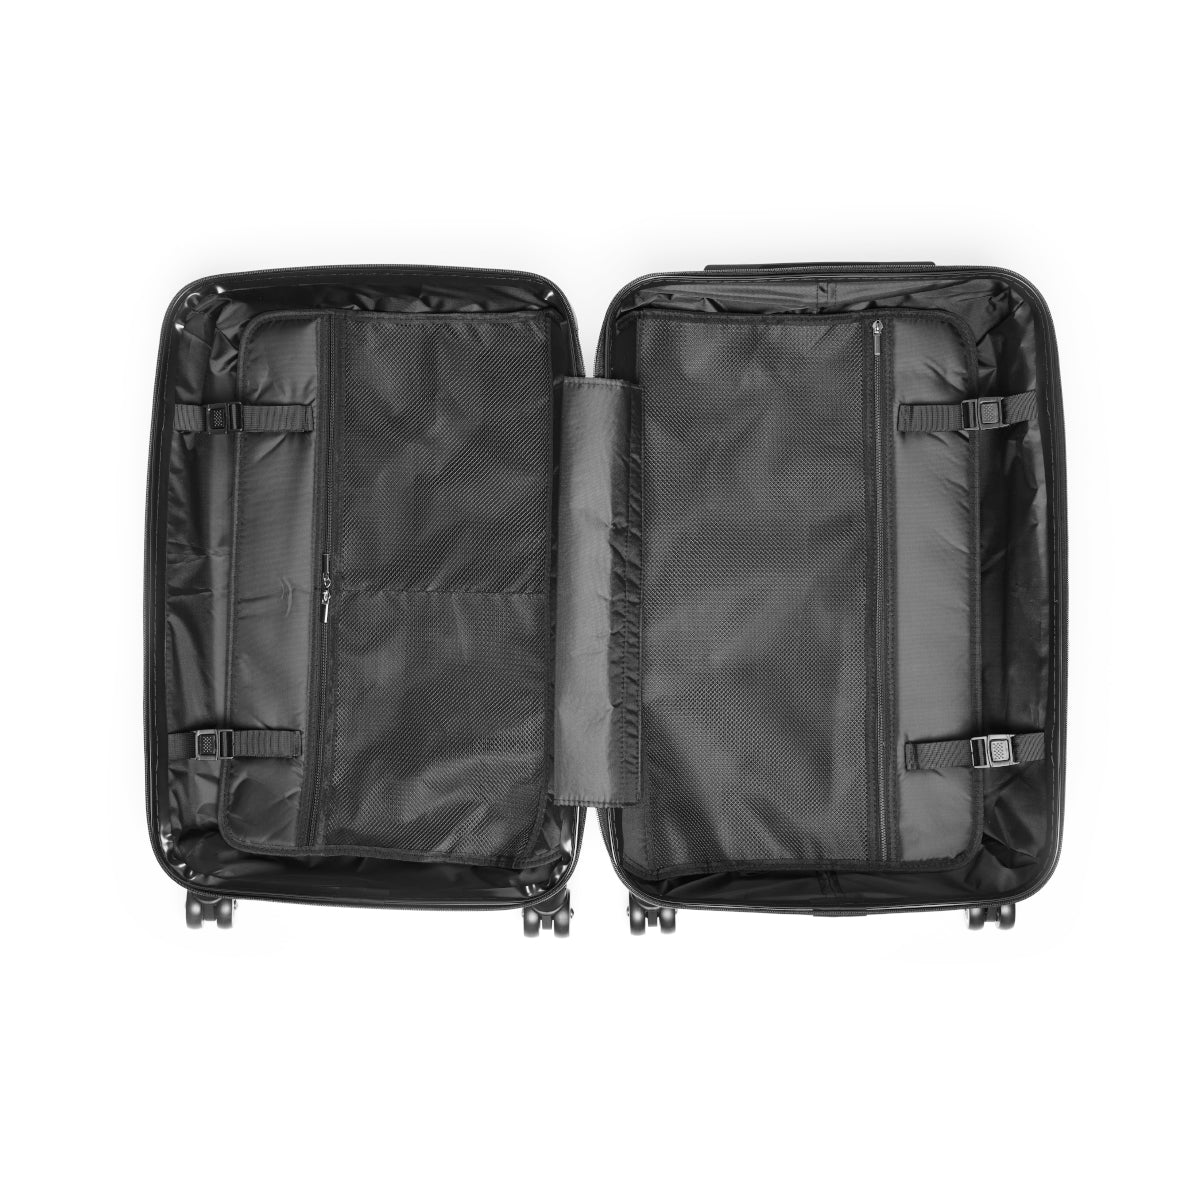 Getrott Bruce Springstein Born in The USA Black Cabin Suitcase Inner Pockets Extended Storage Adjustable Telescopic Handle Inner Pockets Double wheeled Polycarbonate Hard-shell Built-in Lock